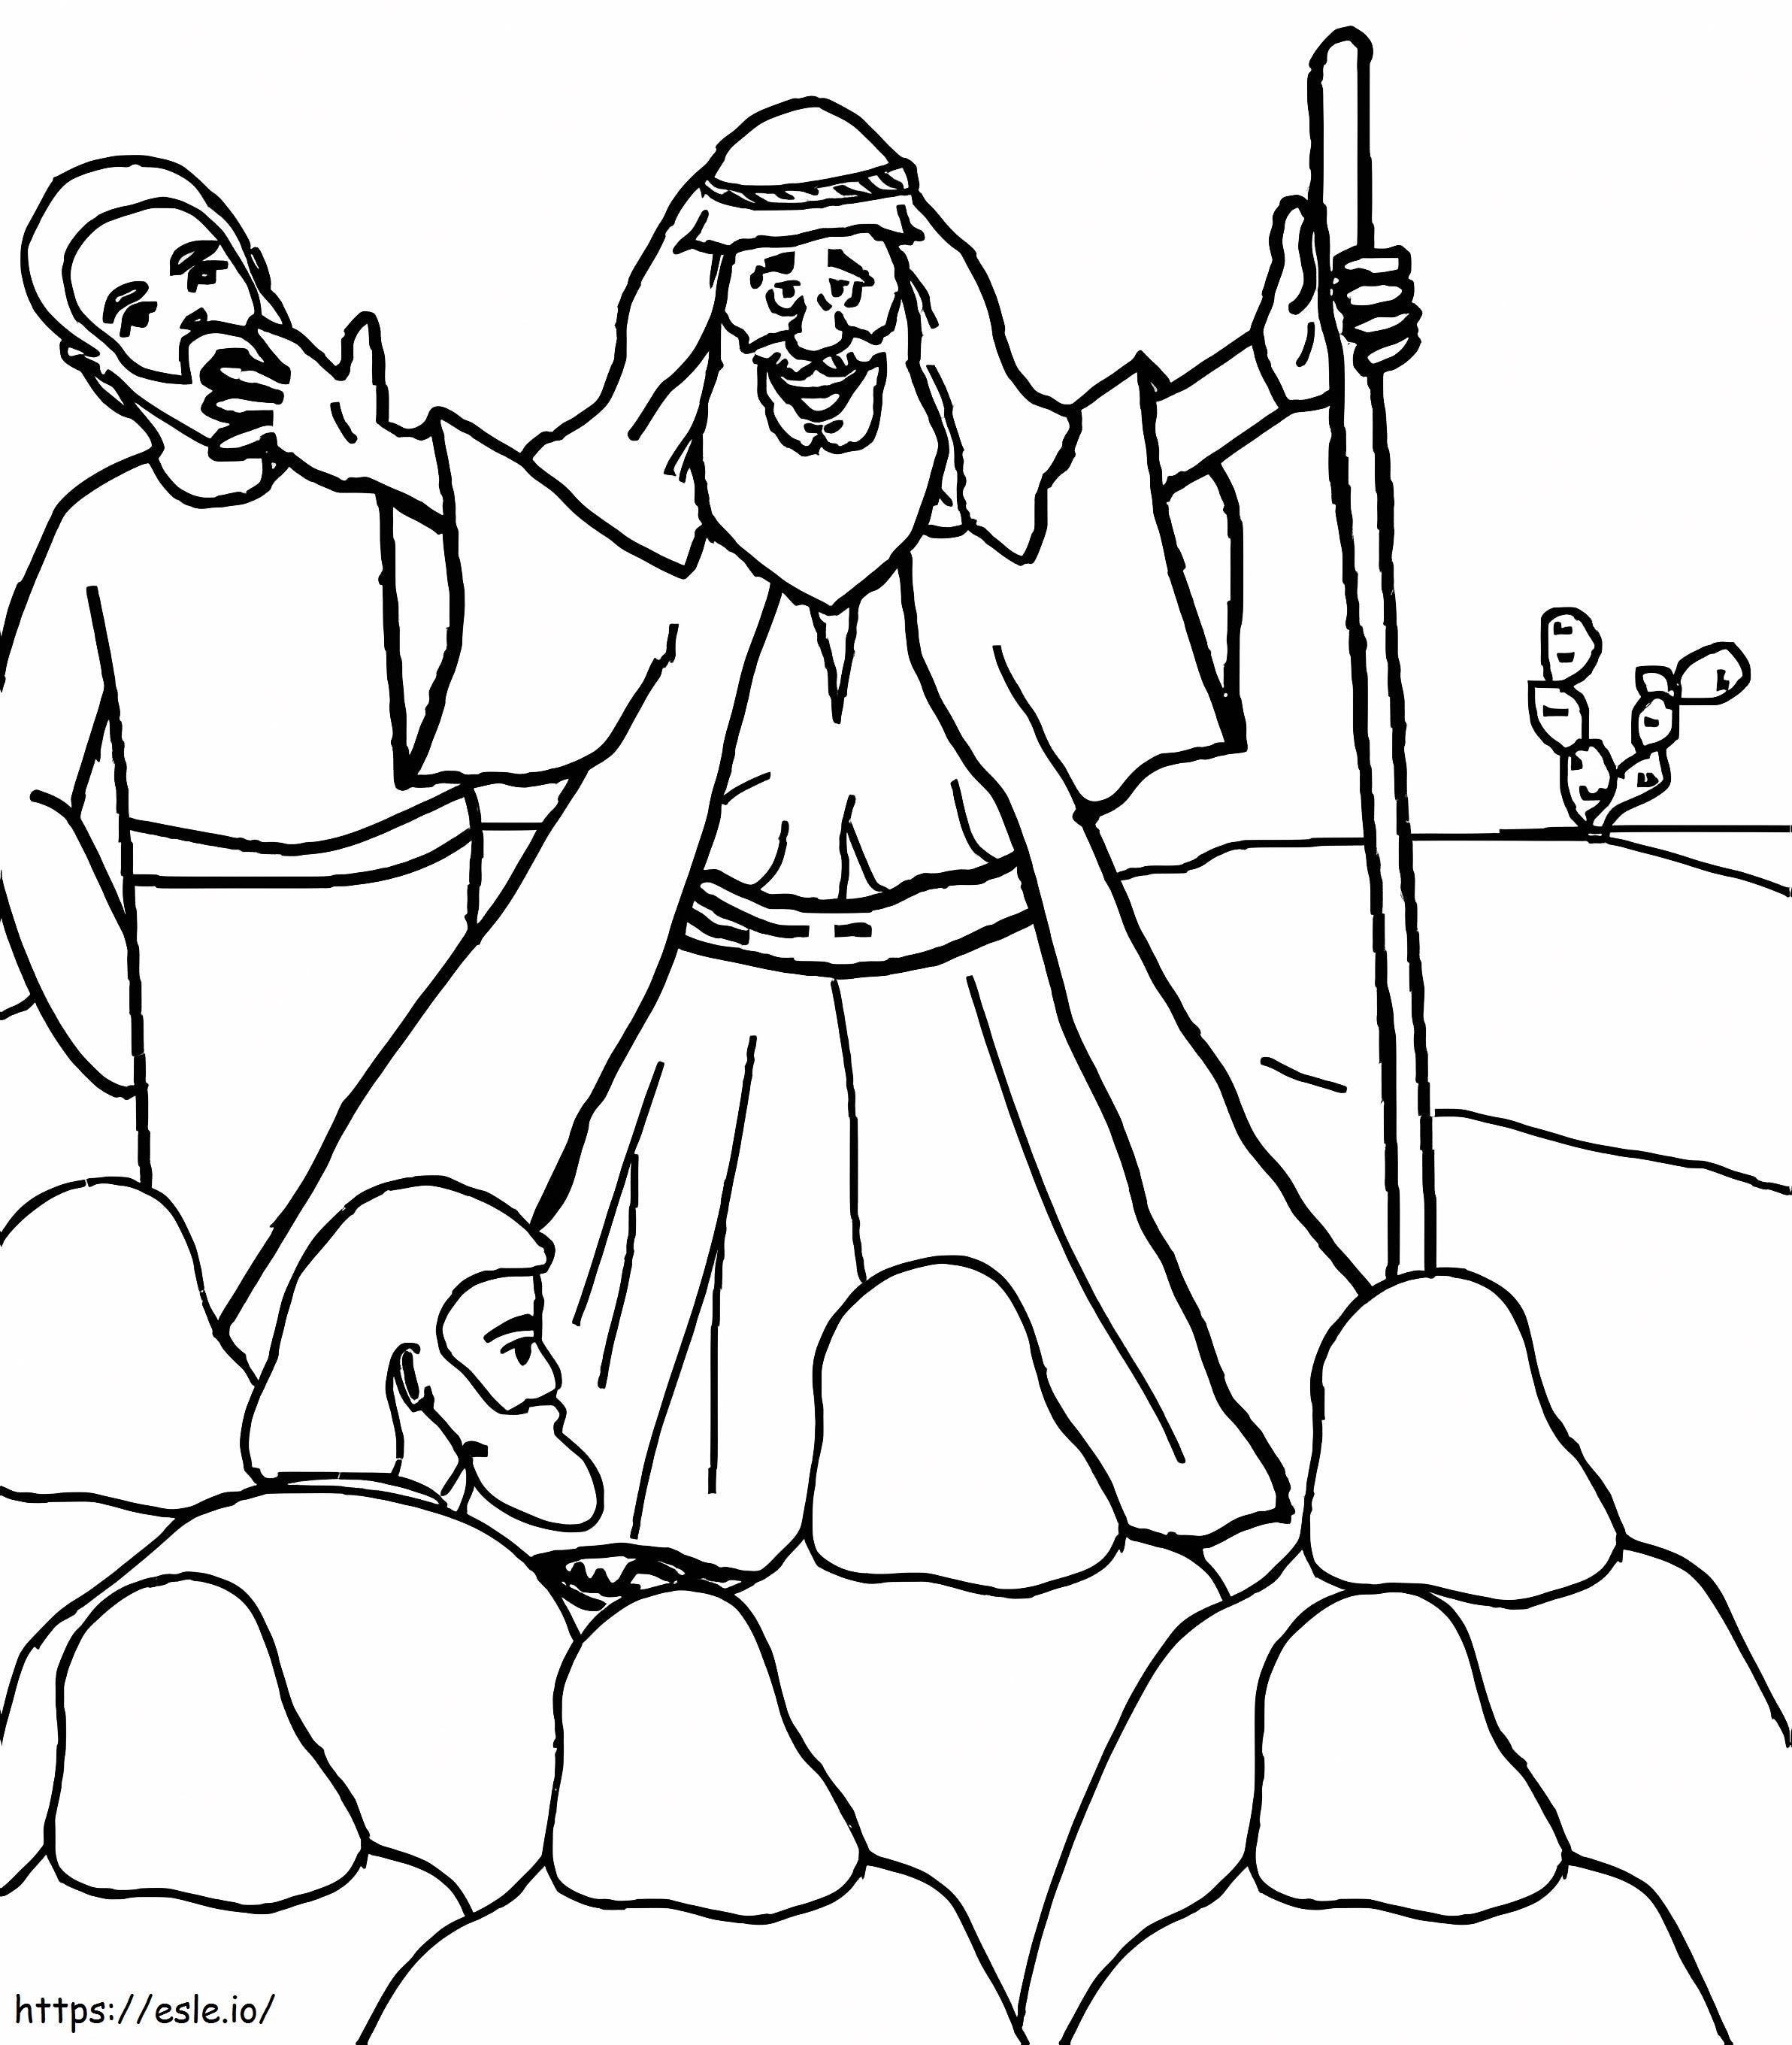 Moses Is Speaking coloring page